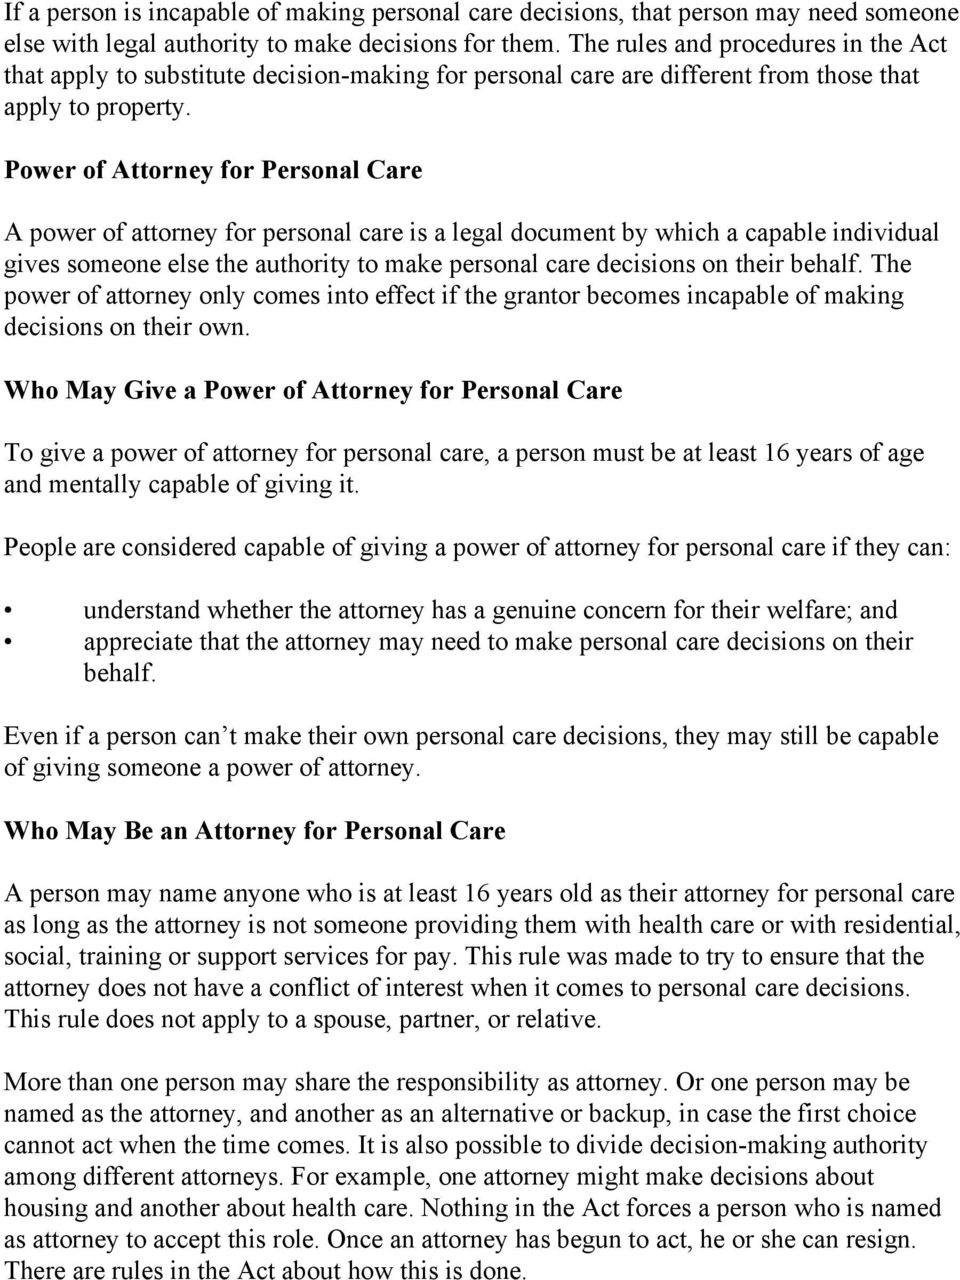 Power of Attorney for Personal Care A power of attorney for personal care is a legal document by which a capable individual gives someone else the authority to make personal care decisions on their